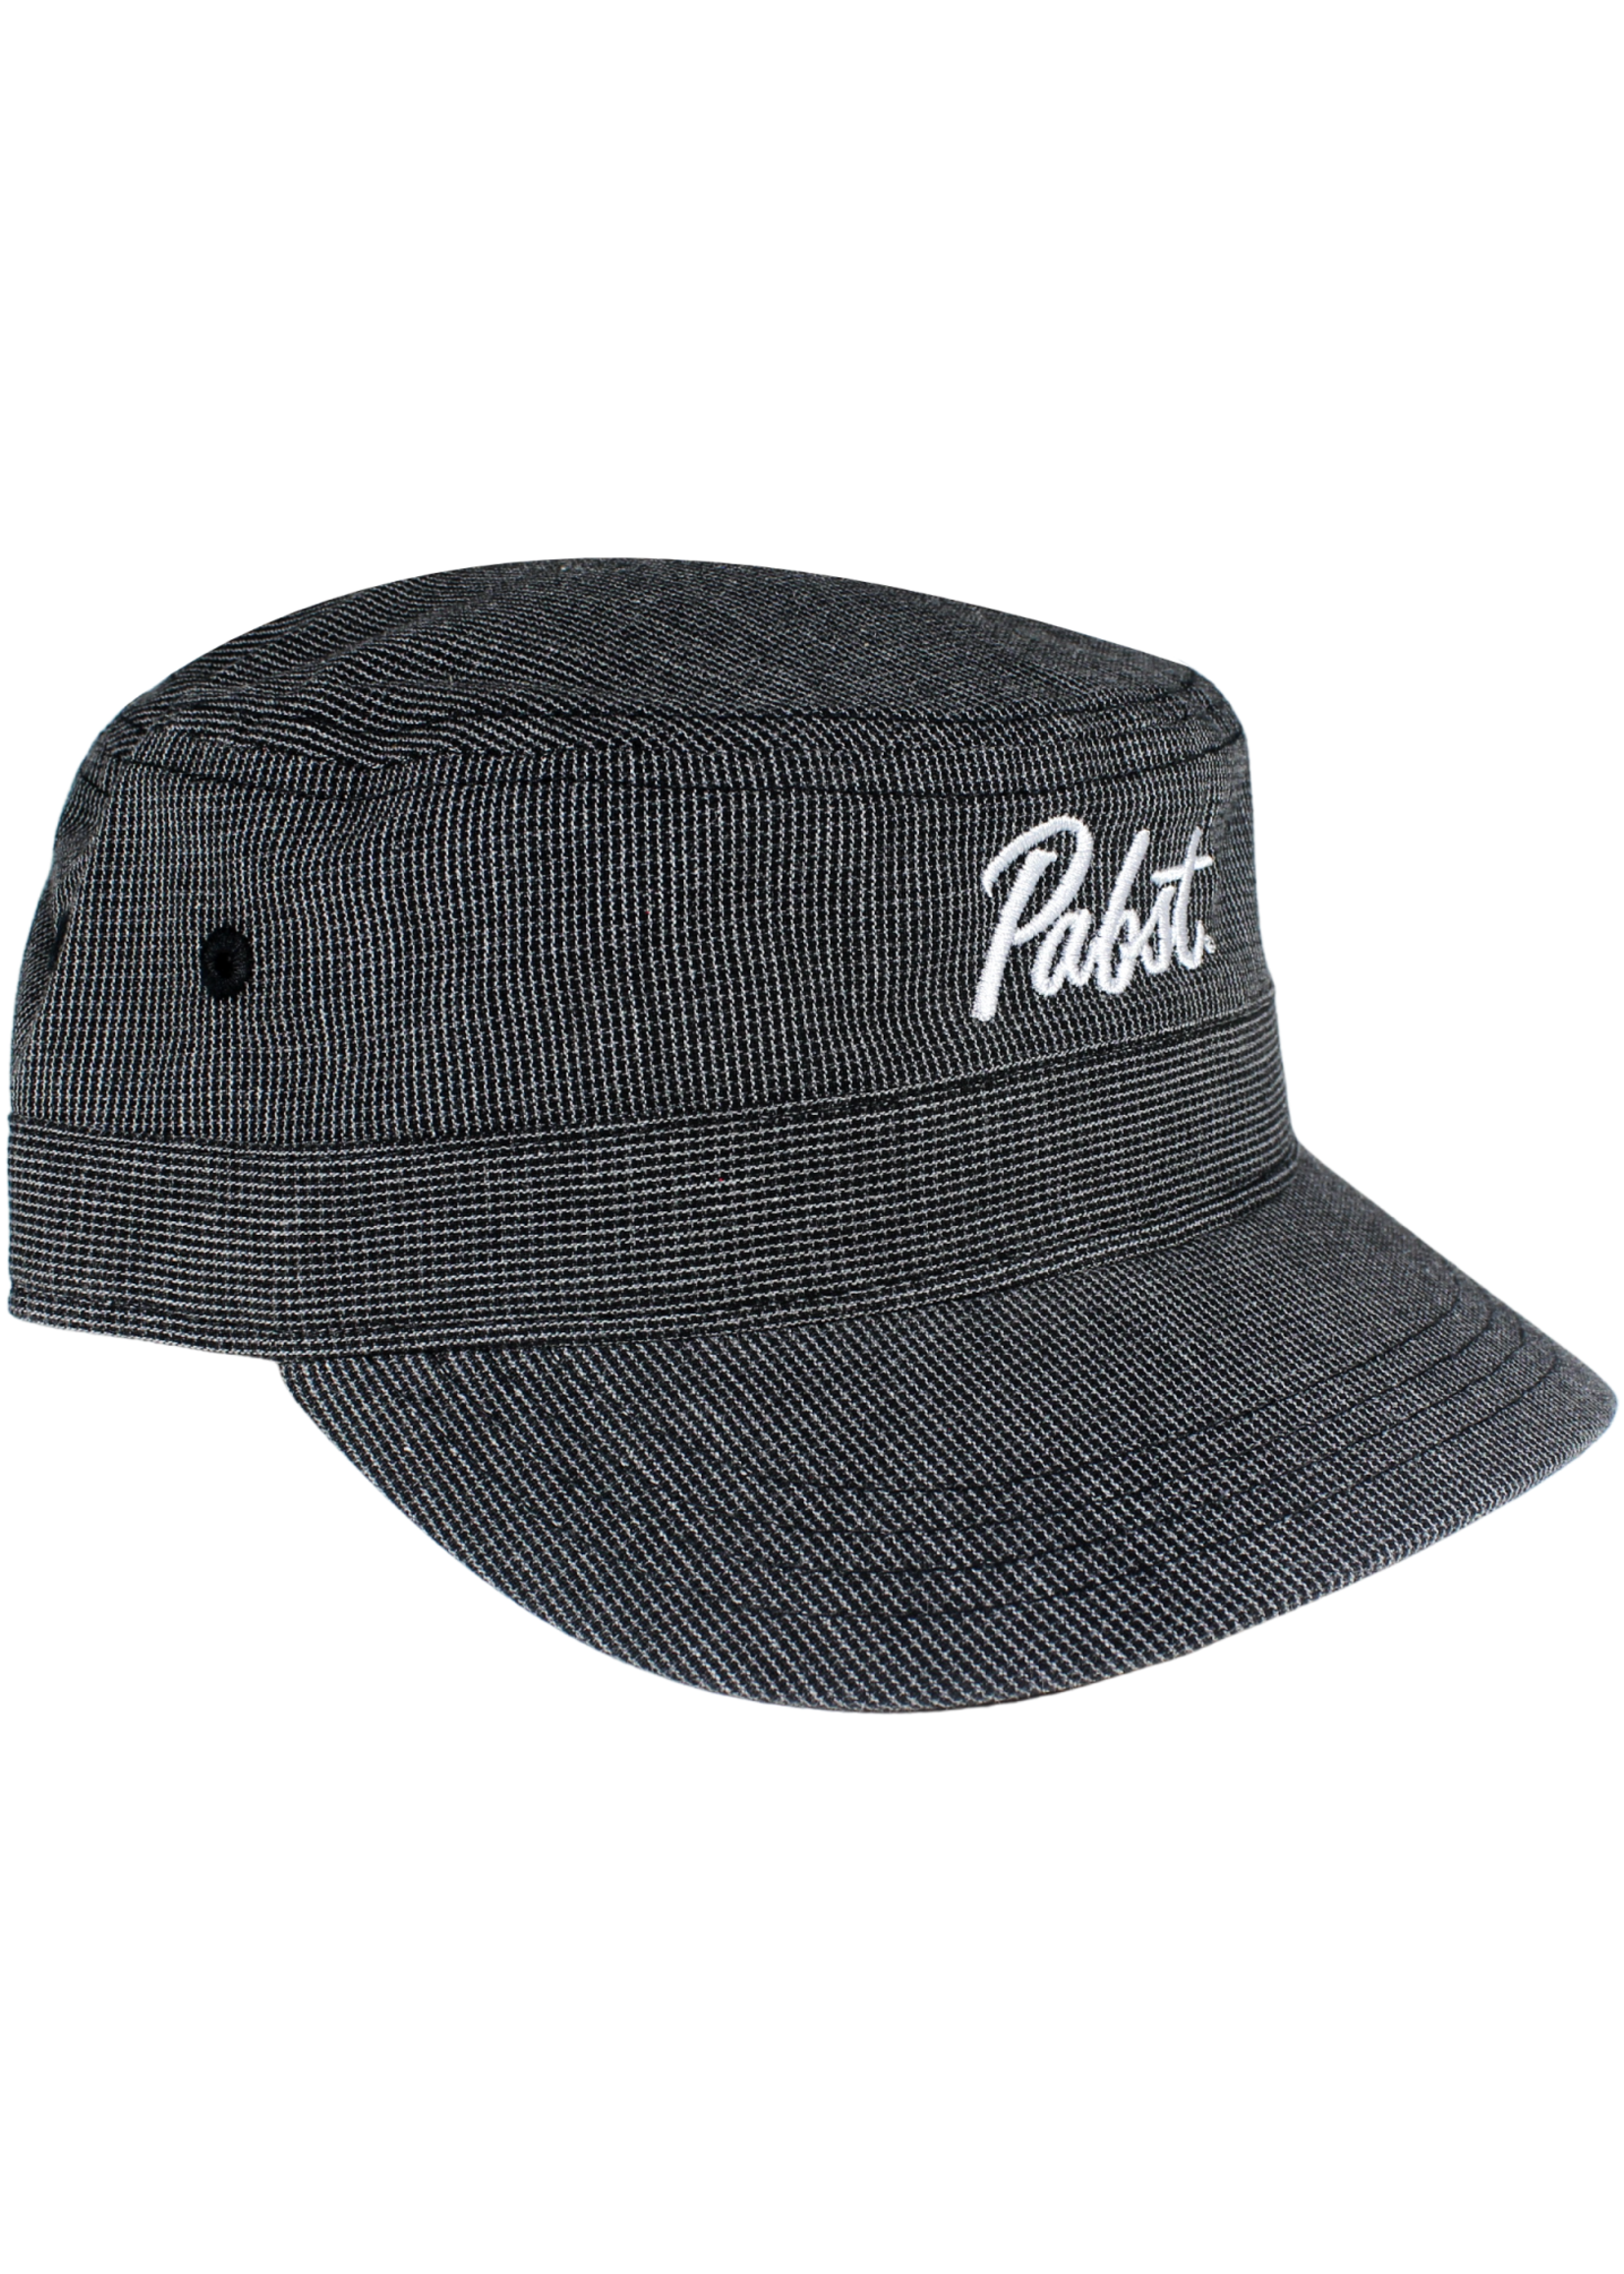 Pabst Pabst Houndstooth Cadet Hat